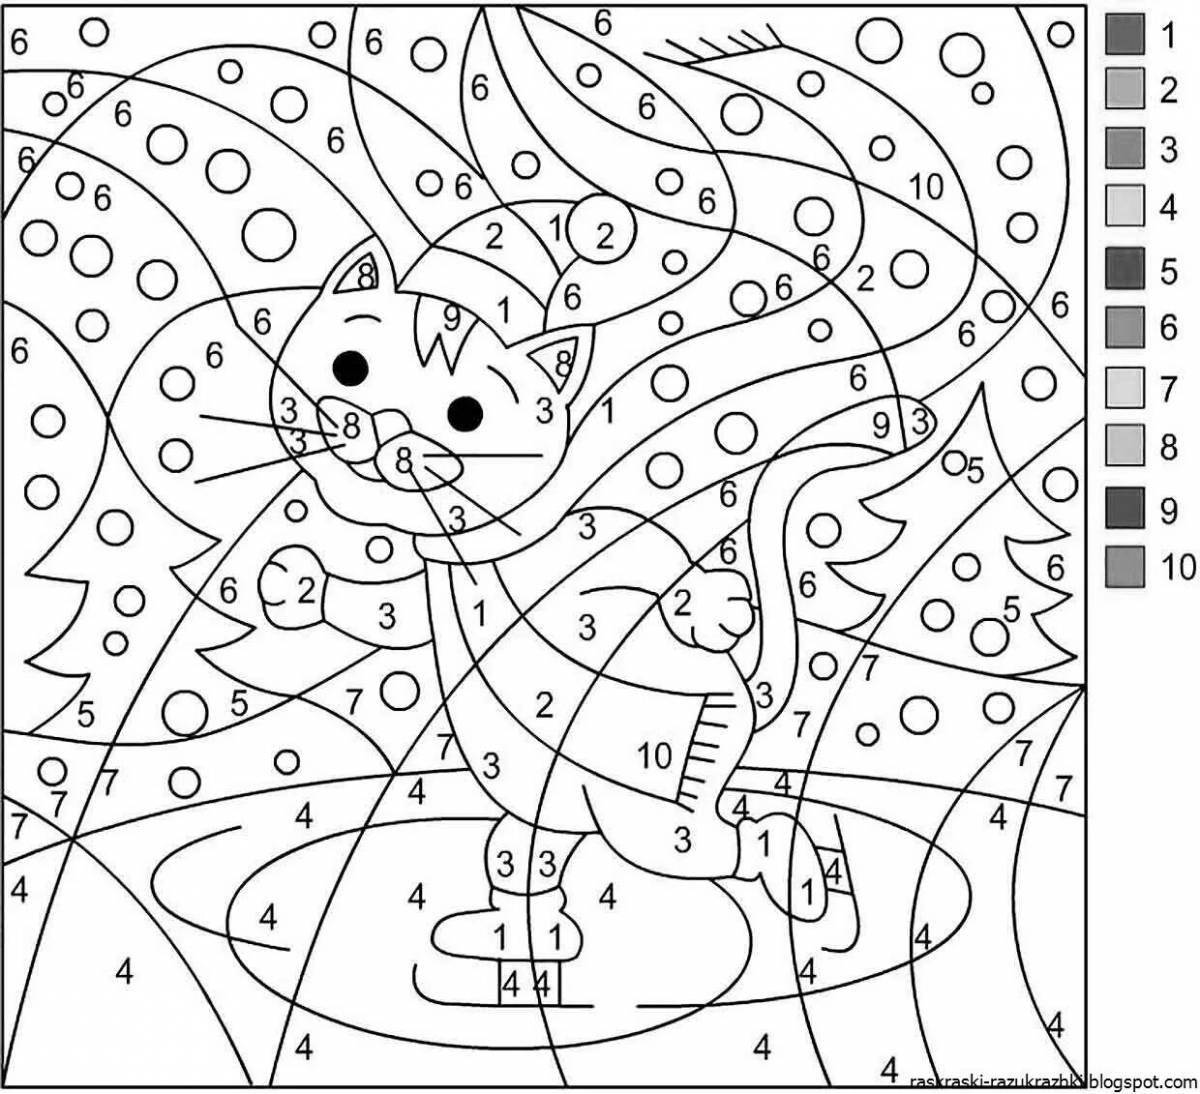 Fun coloring book for boys and girls aged 6-7